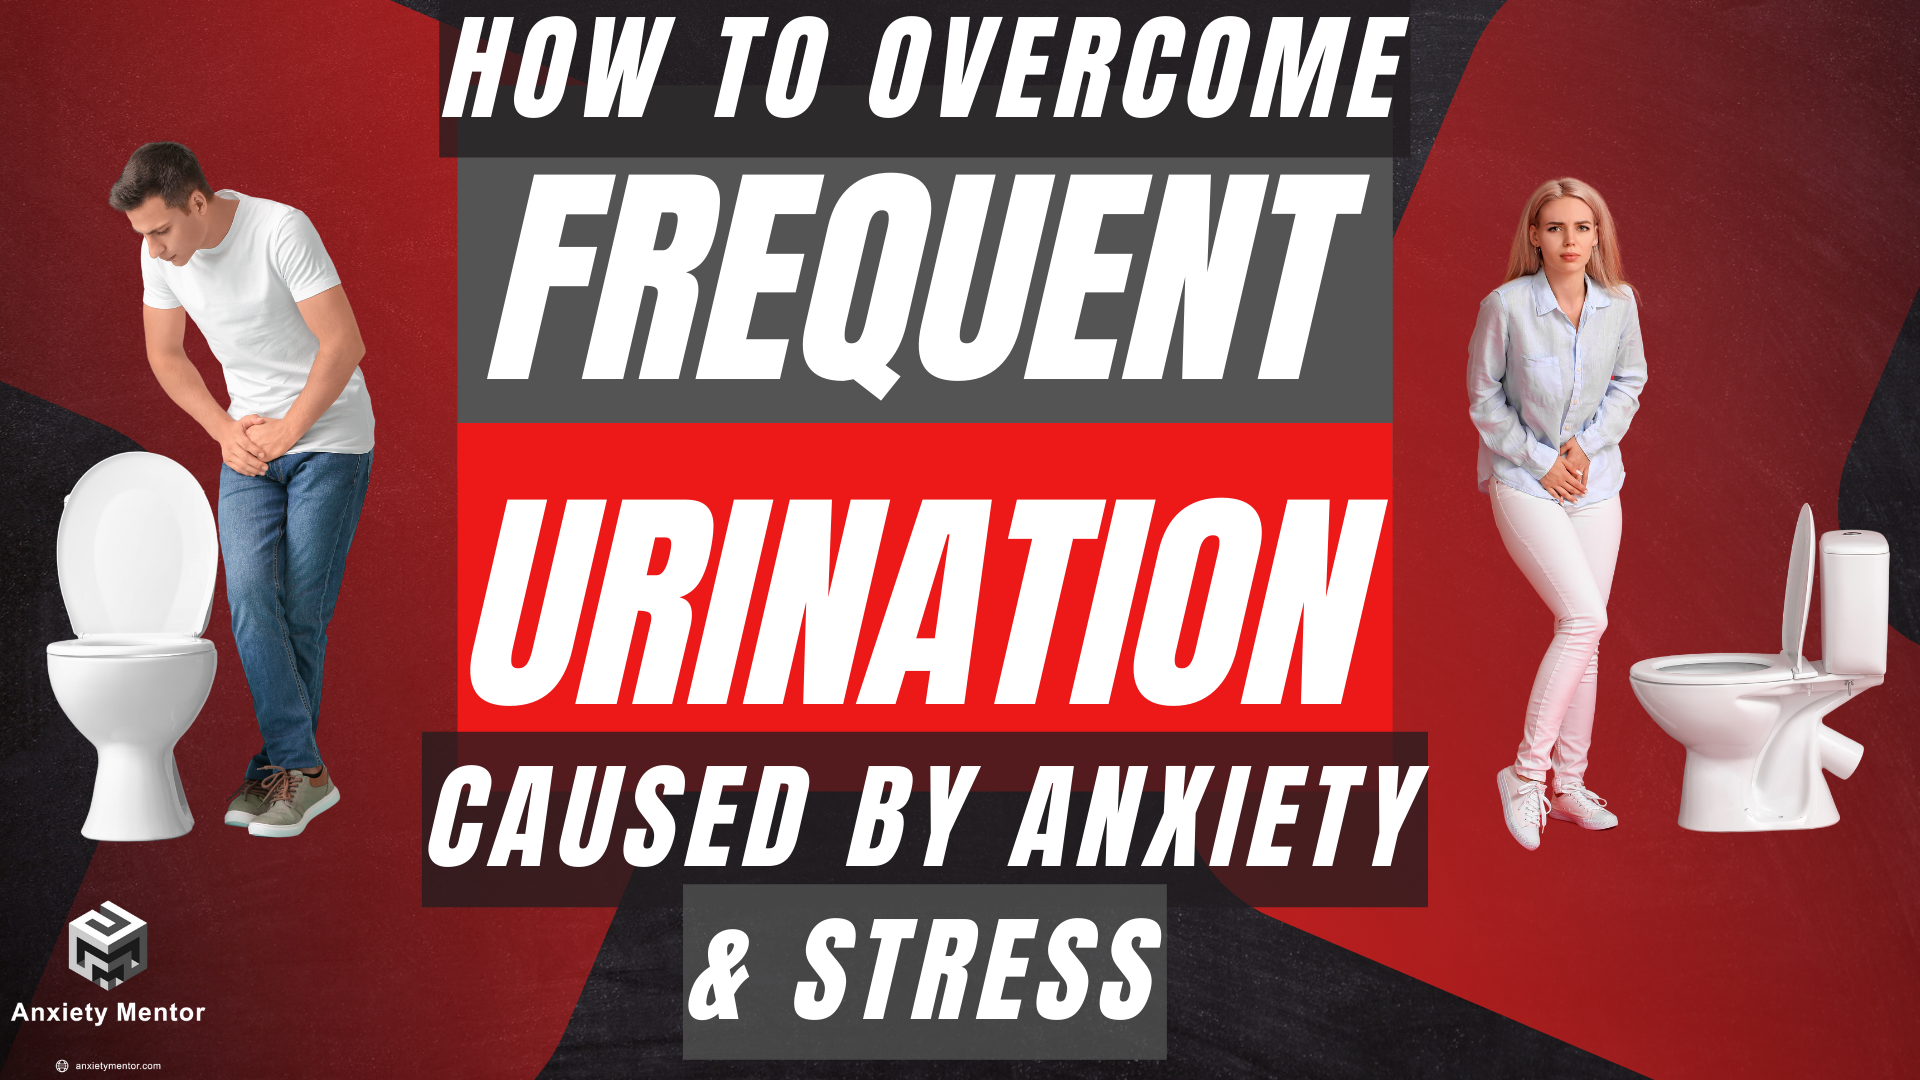 How to Overcome Frequent Urination